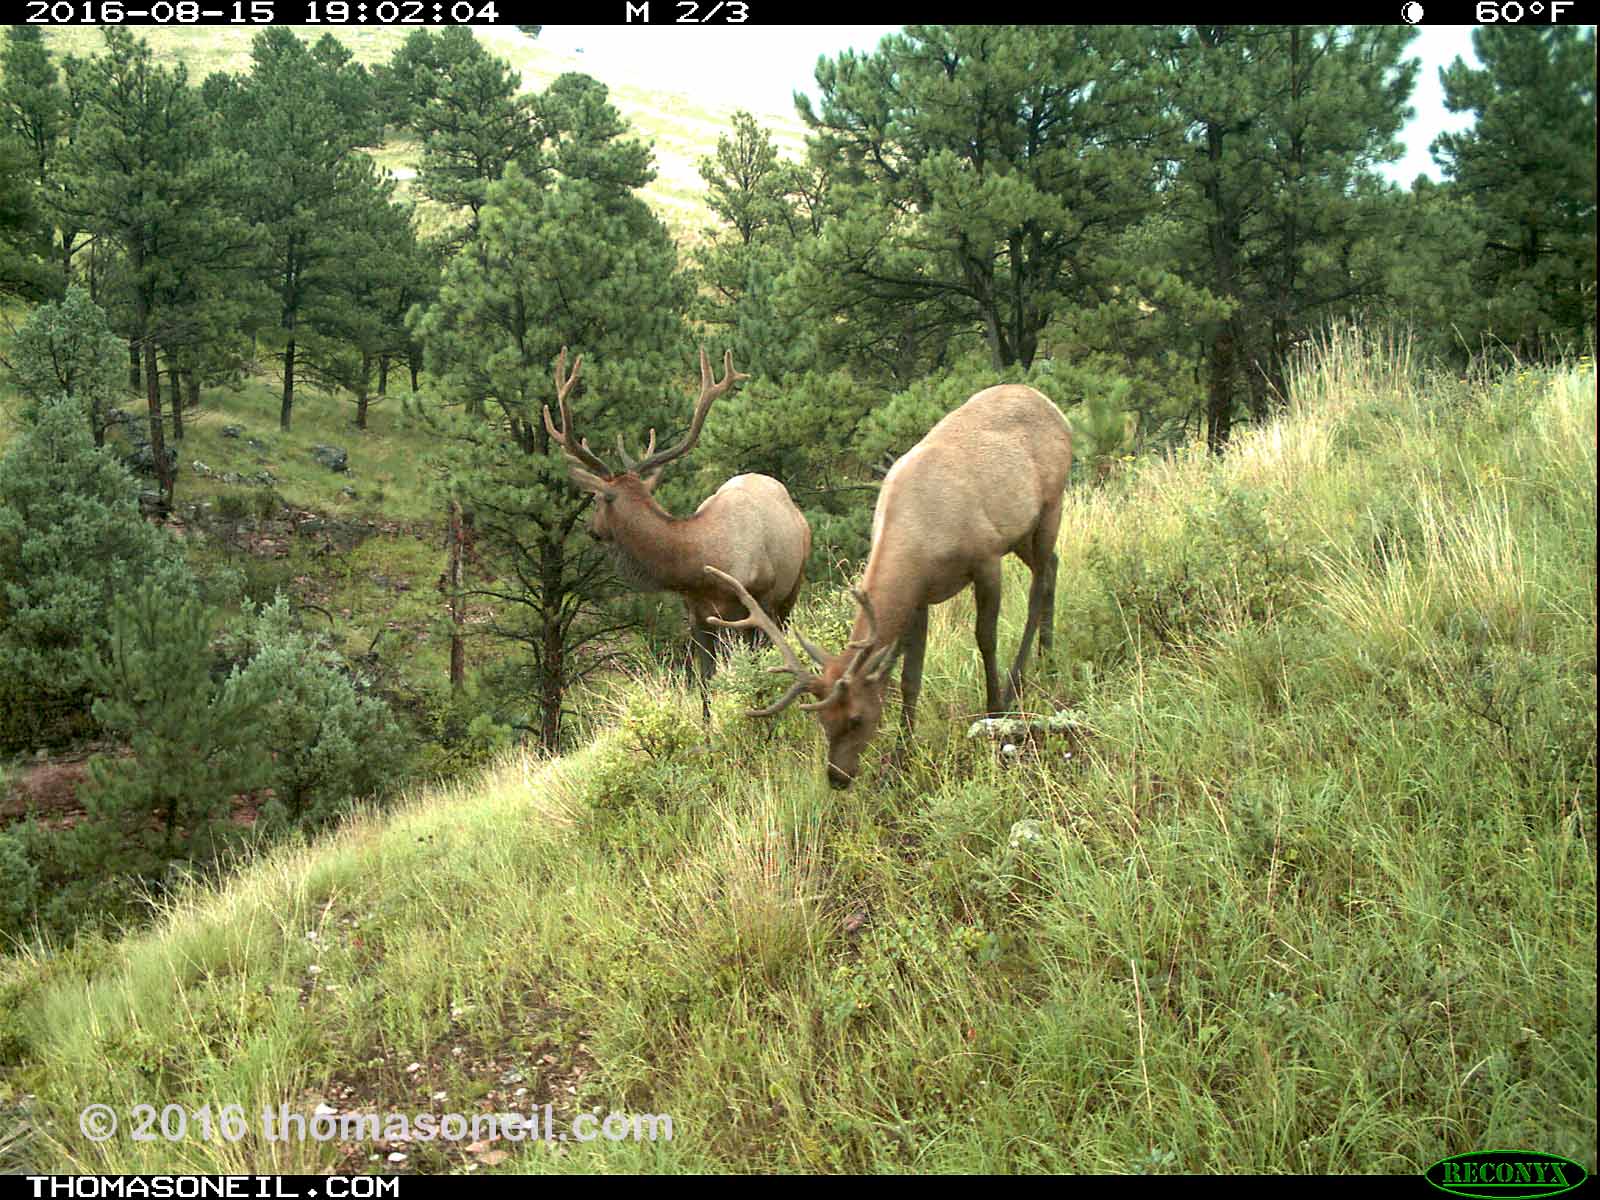 Elk on trailcam, Wind Cave National Park, Aug. 15, 2016.  Click for next photo.